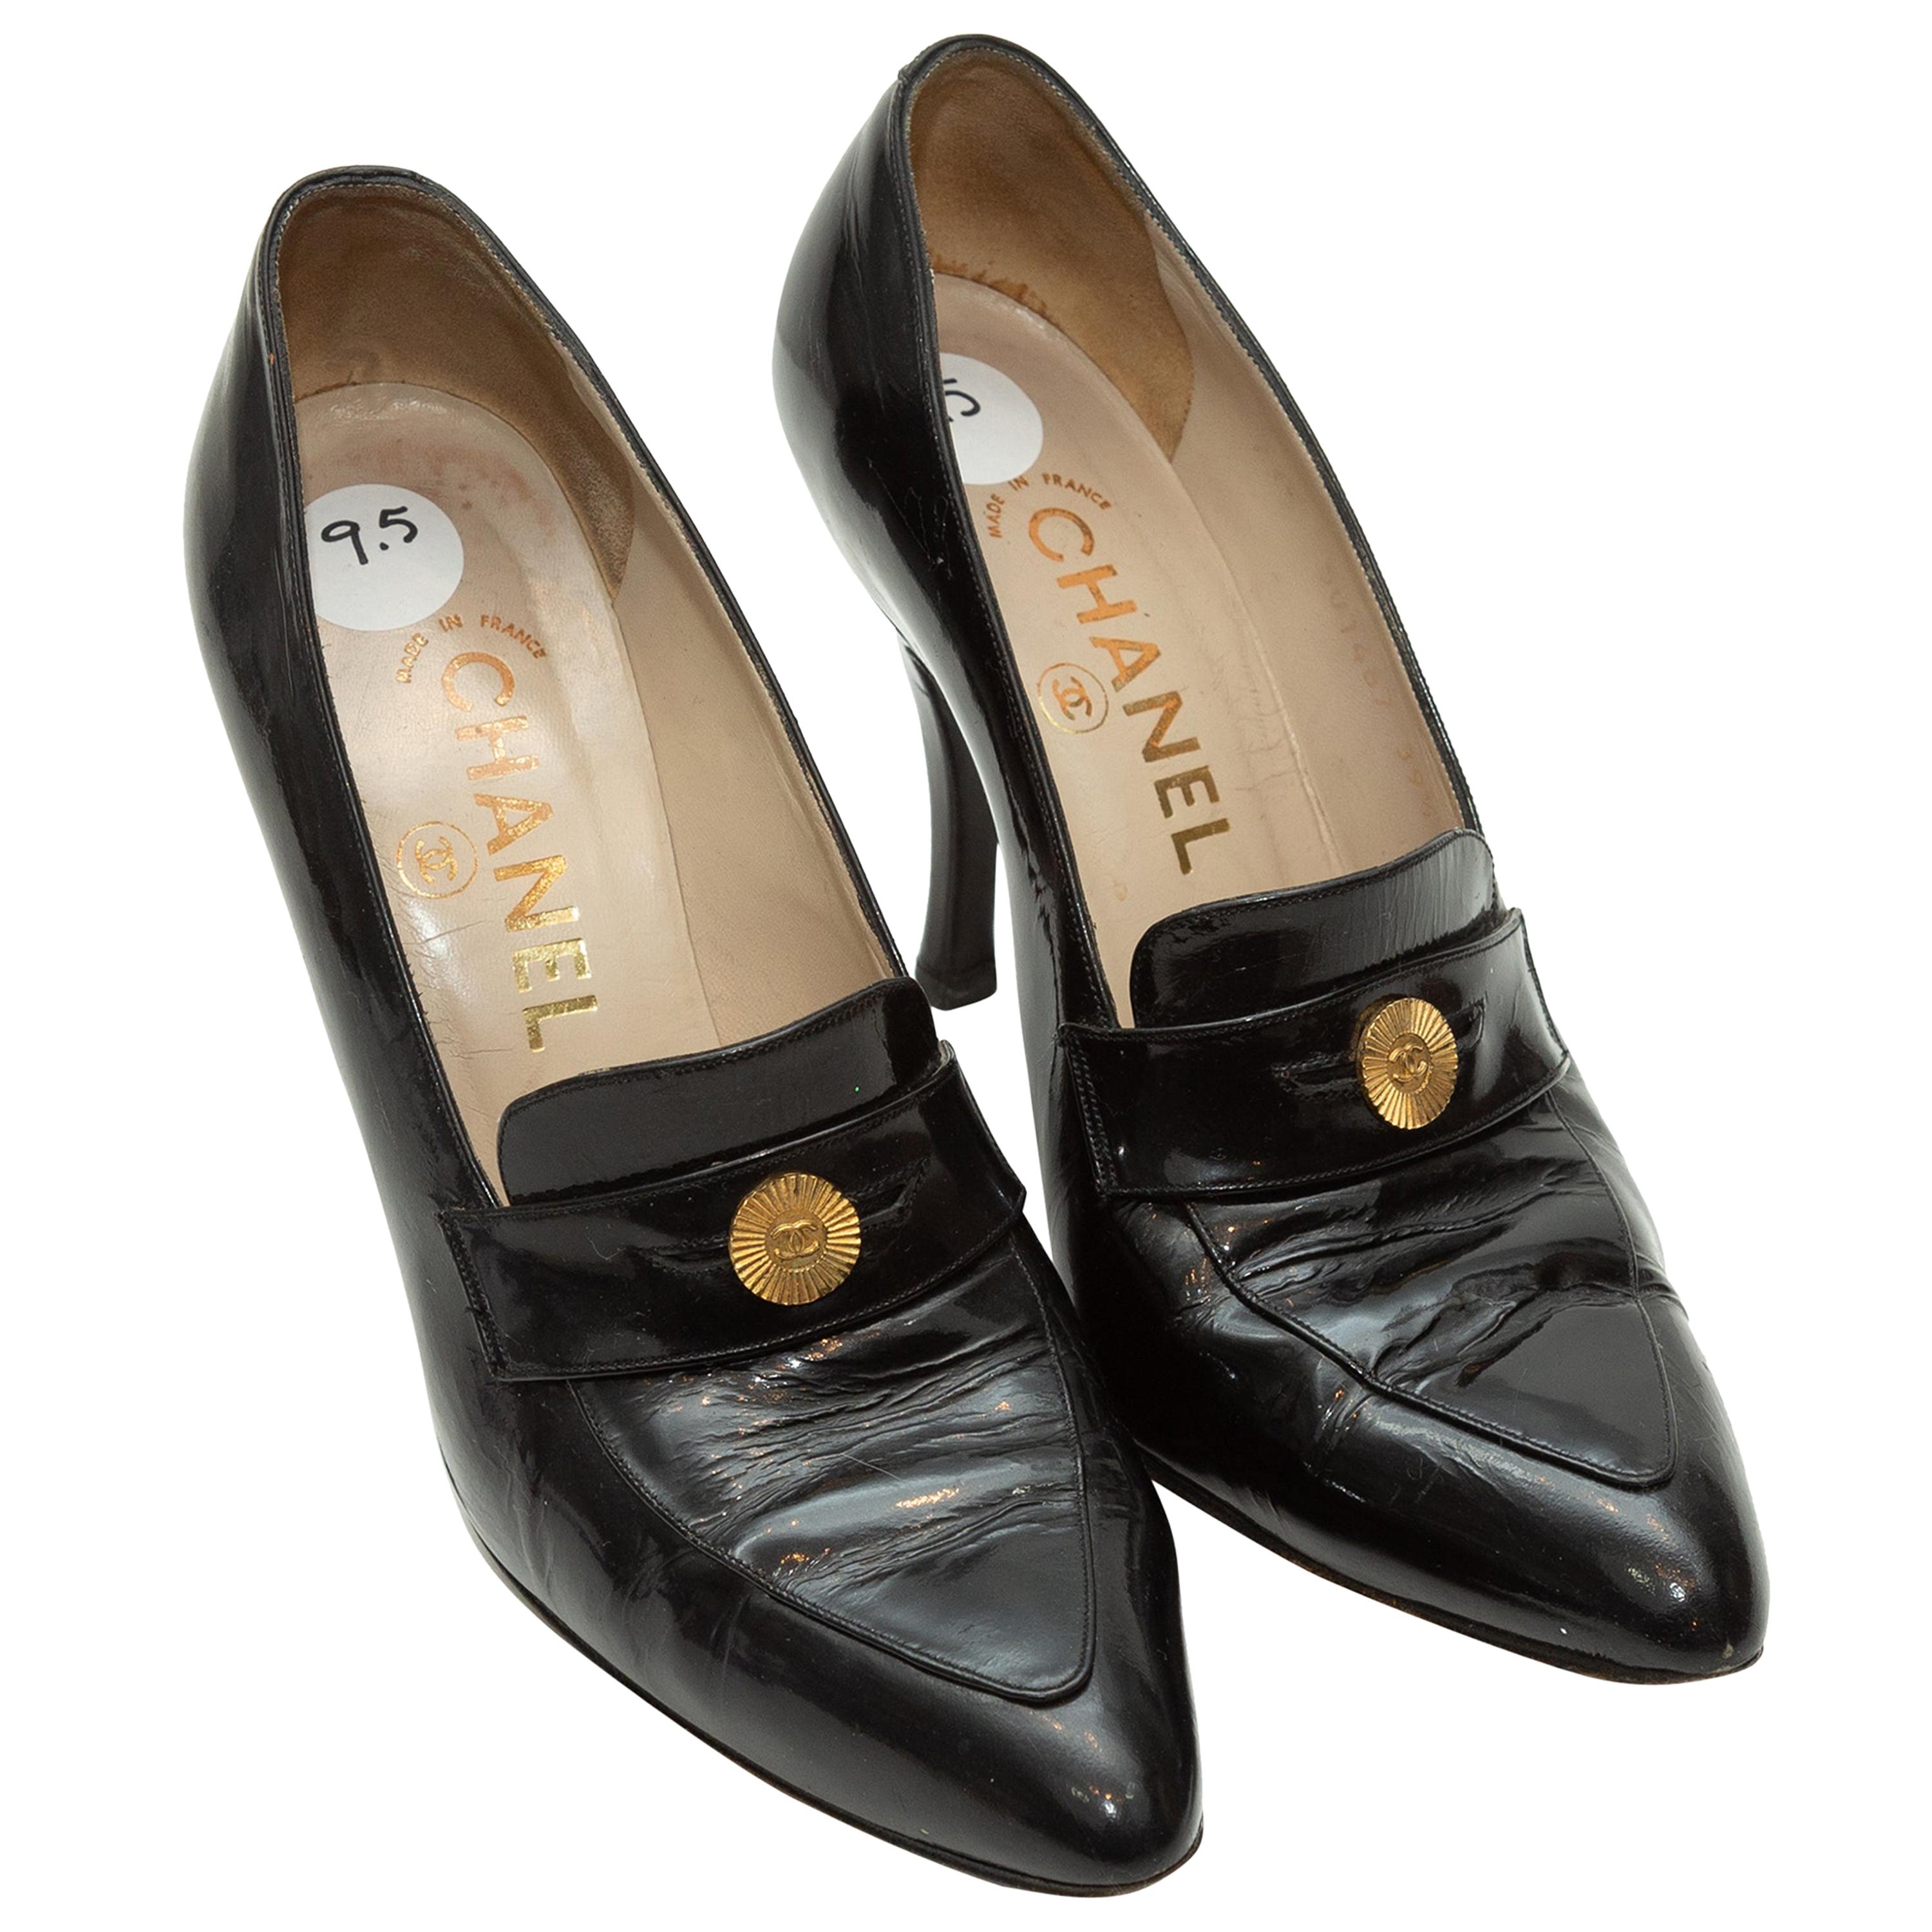 Chanel Black Leather CC Penny Loafers Size 39.5 Chanel